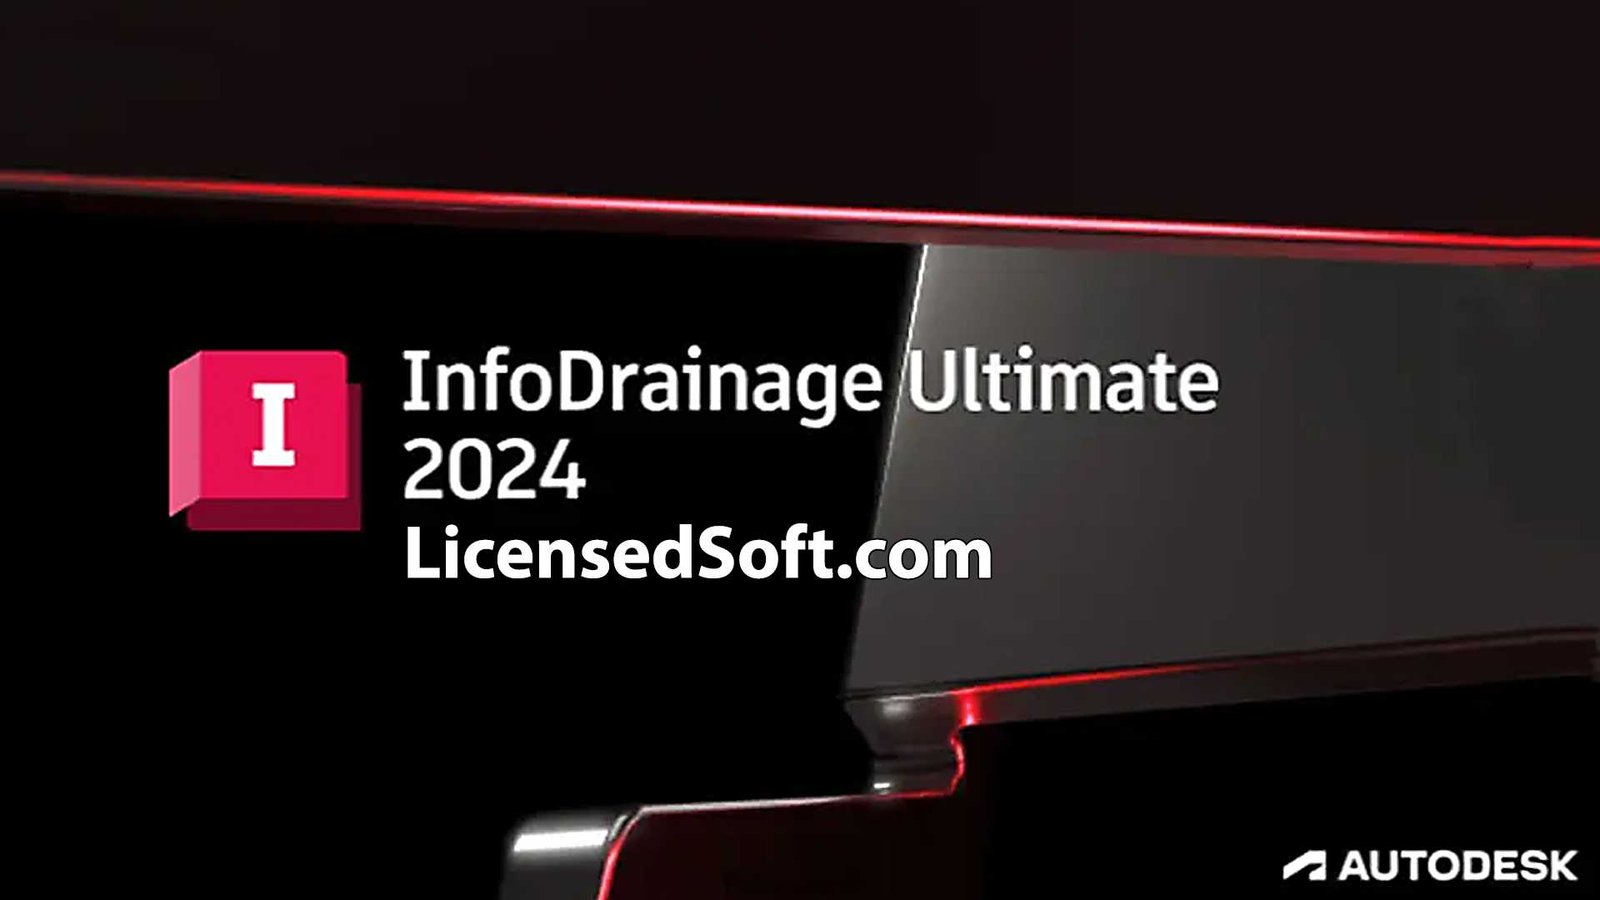 Autodesk InfoDrainage Ultimate 2024.1 For Civil Cover Image By LicensedSoft